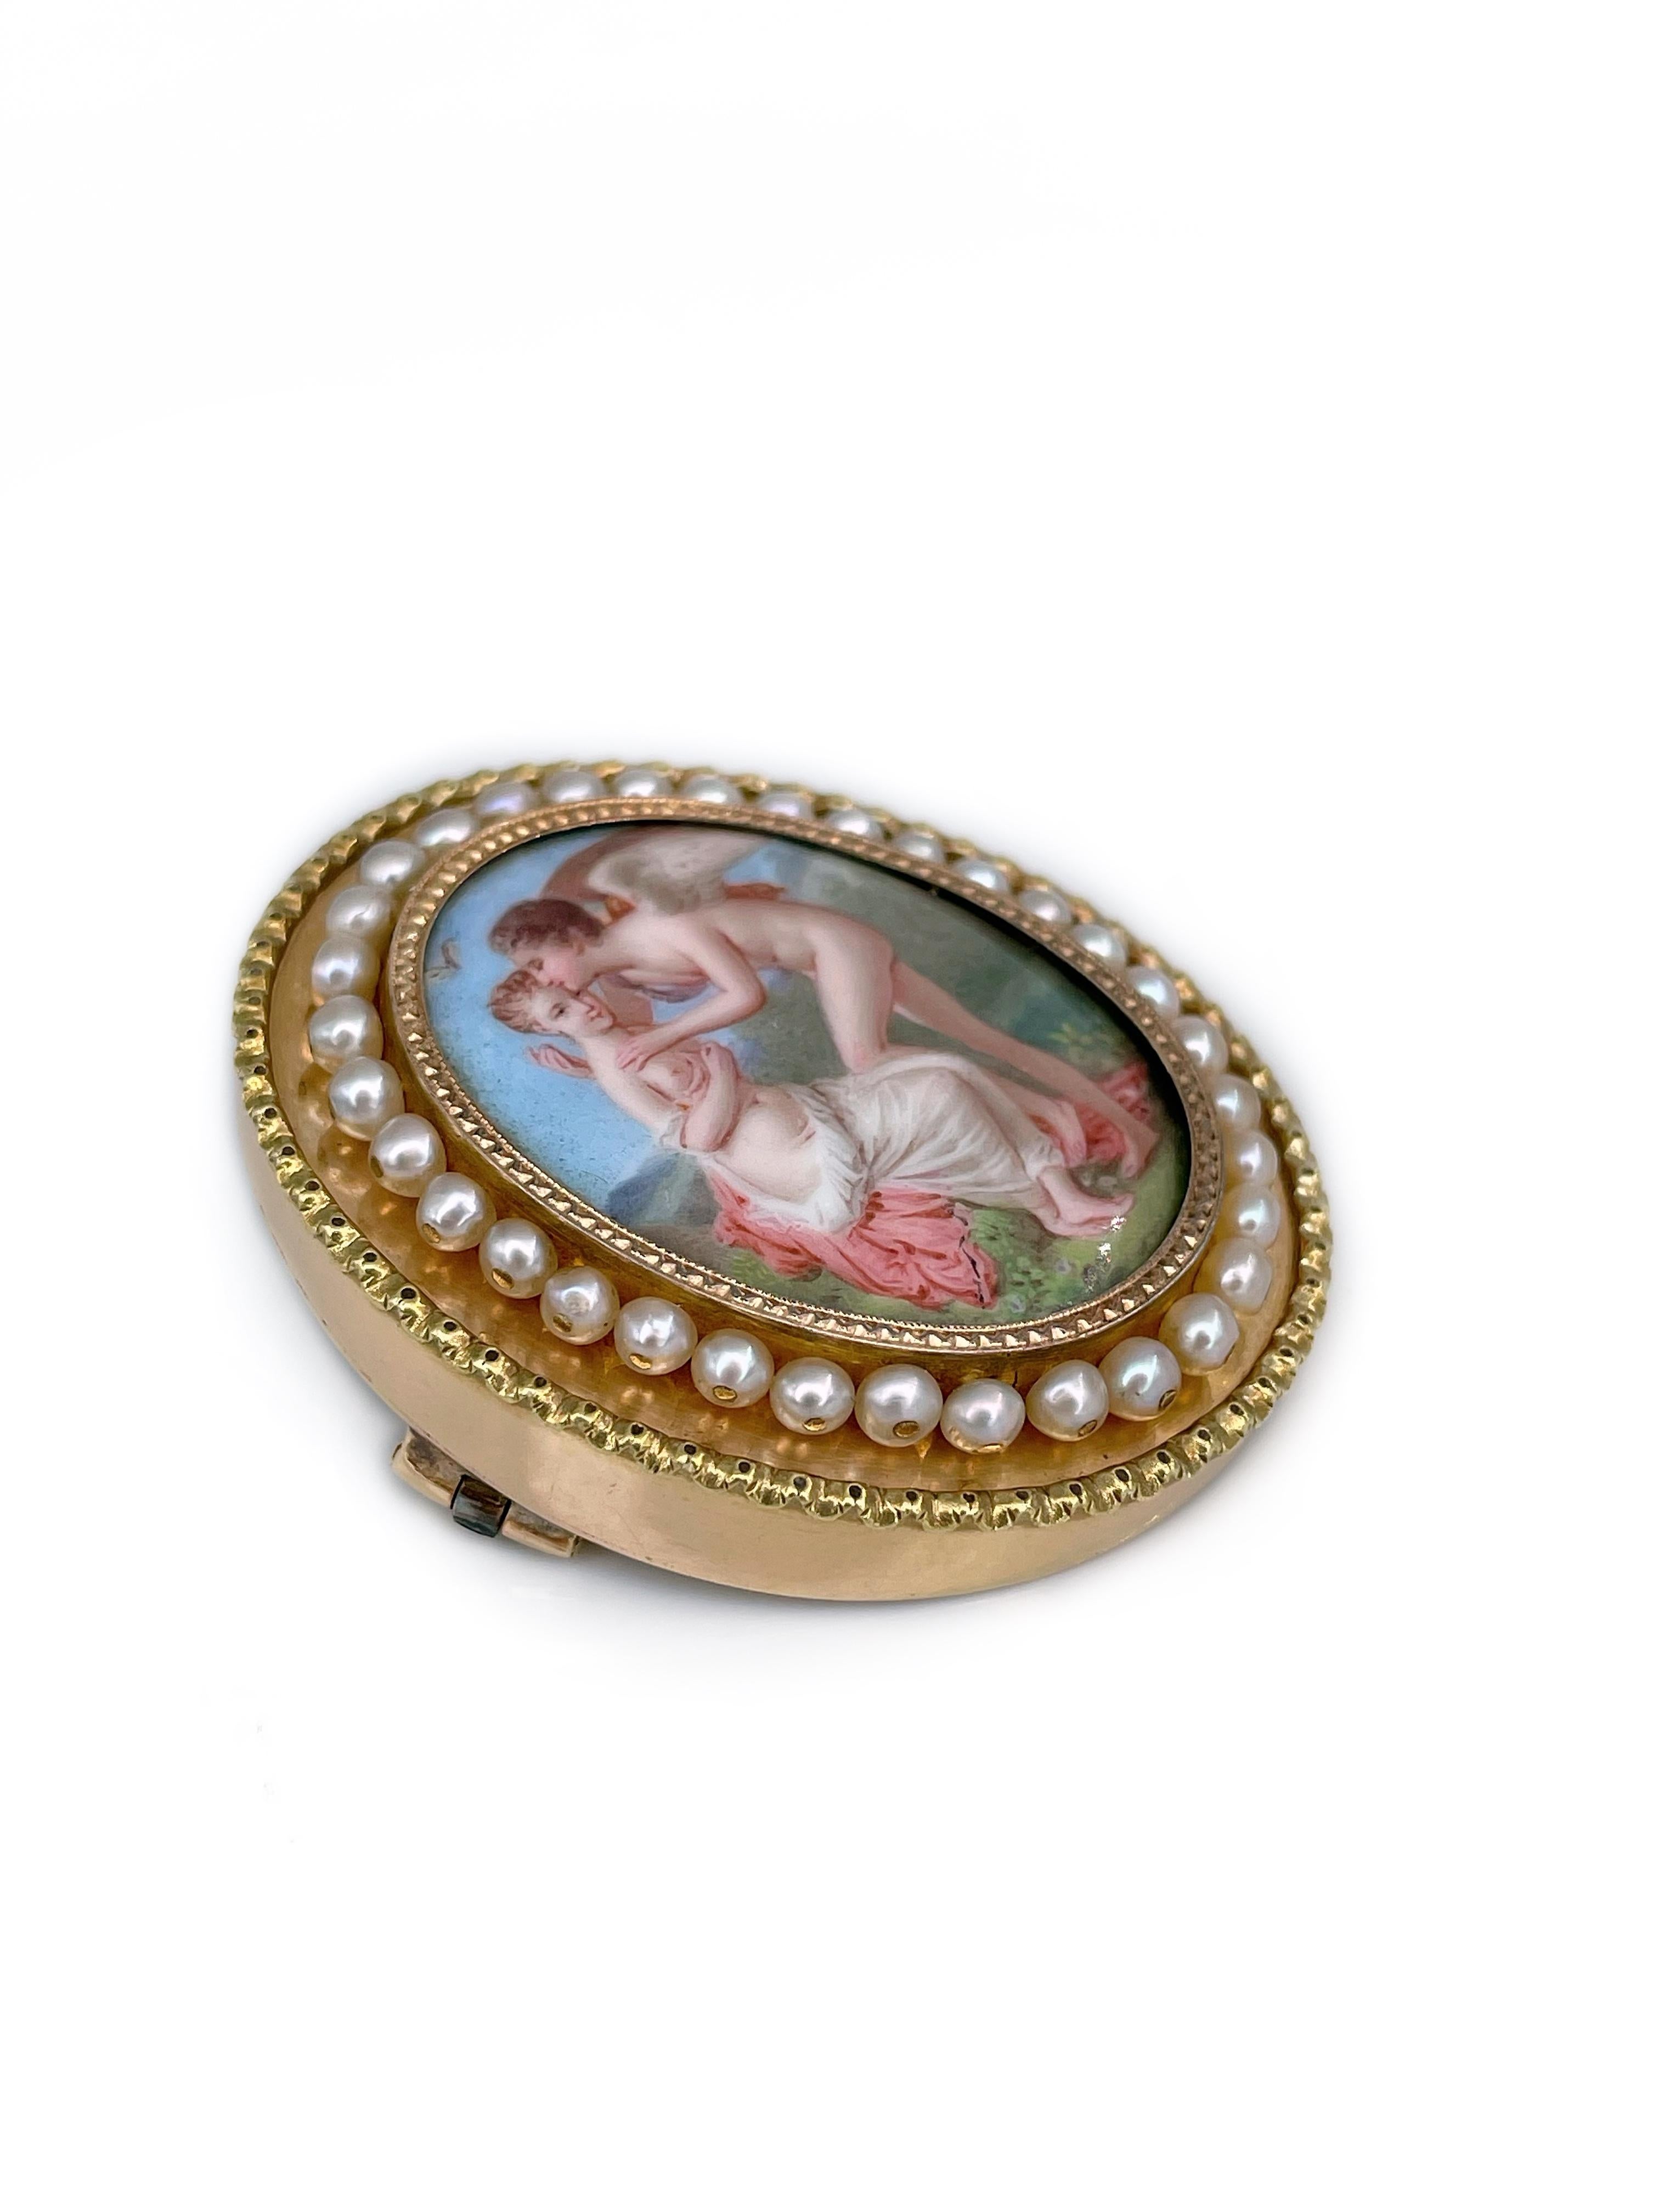 This is a Victorian oval pin brooch crafted in 18K yellow gold. Circa 1890.

The piece features a detailed miniature painting of a lady with Cupid. It is hand painted on a porcelain. The brooch is adorned with cultured pearls.

Weight: 17.67g
Size: